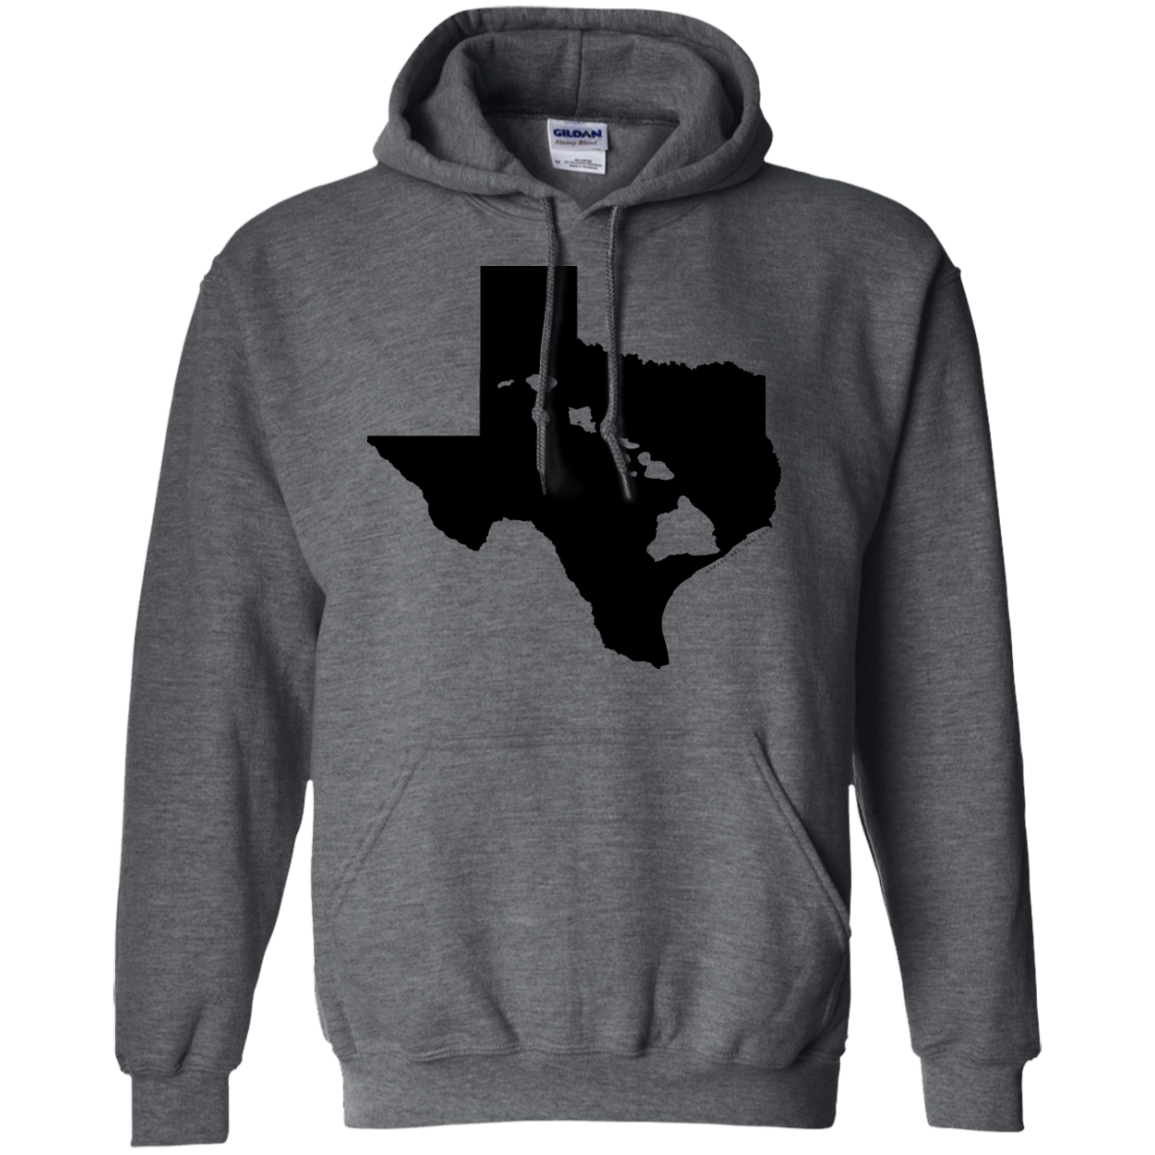 Living In Texas With Hawaii Roots Pullover Hoodie 8 oz - Hawaii Nei All Day